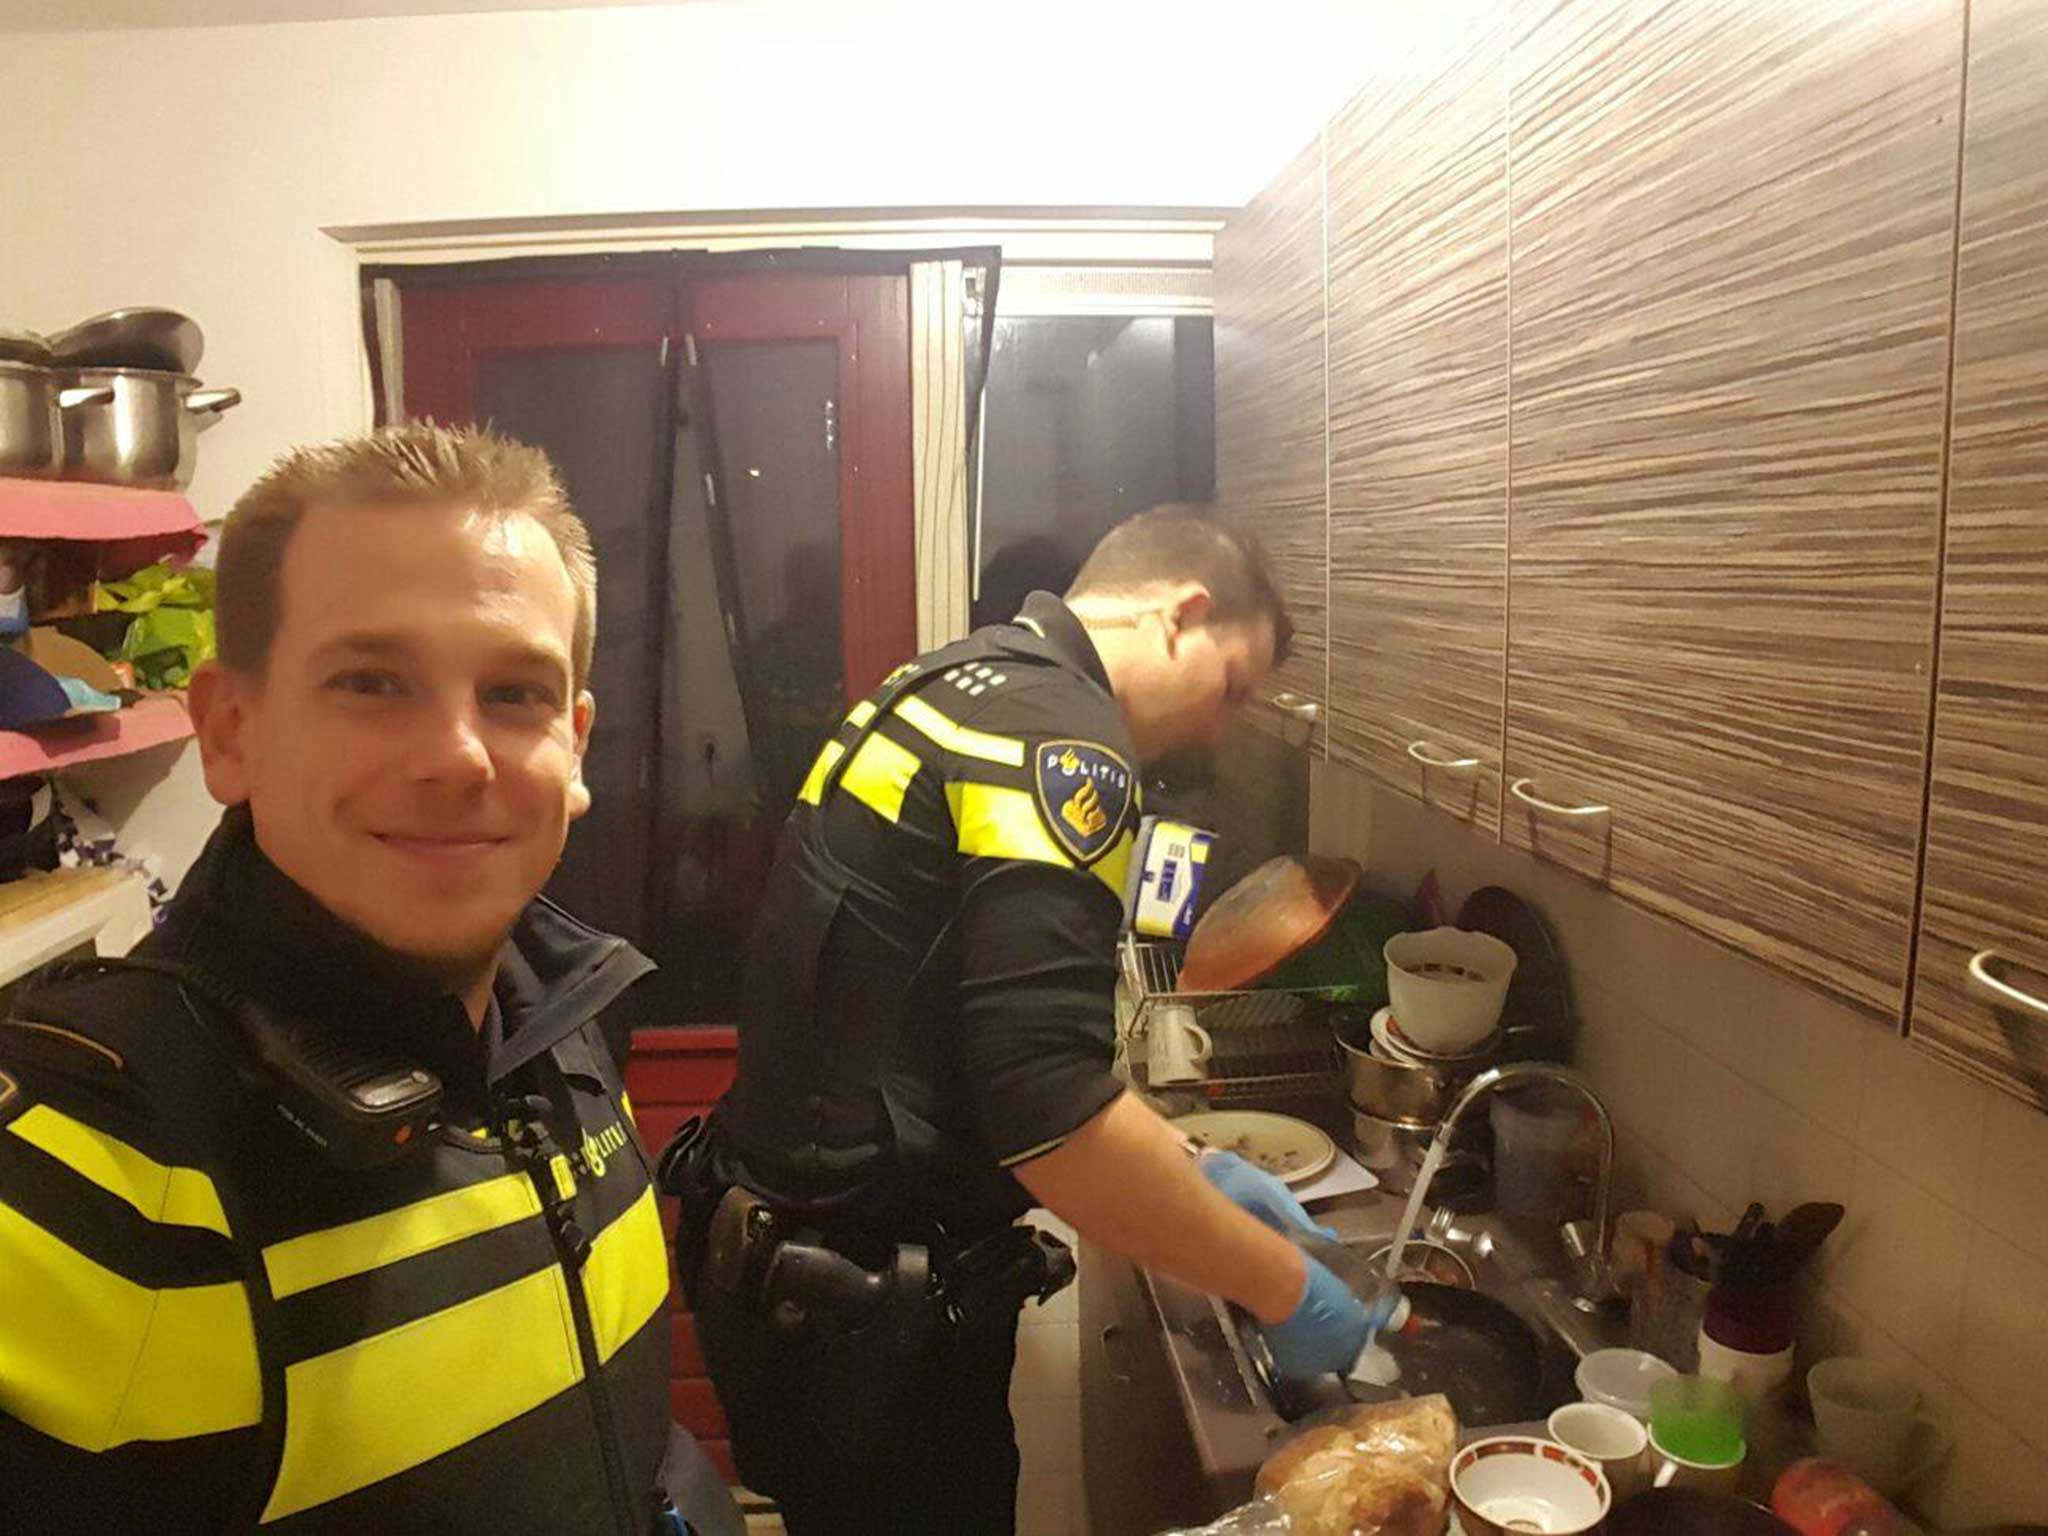 The two officers in the kitchen